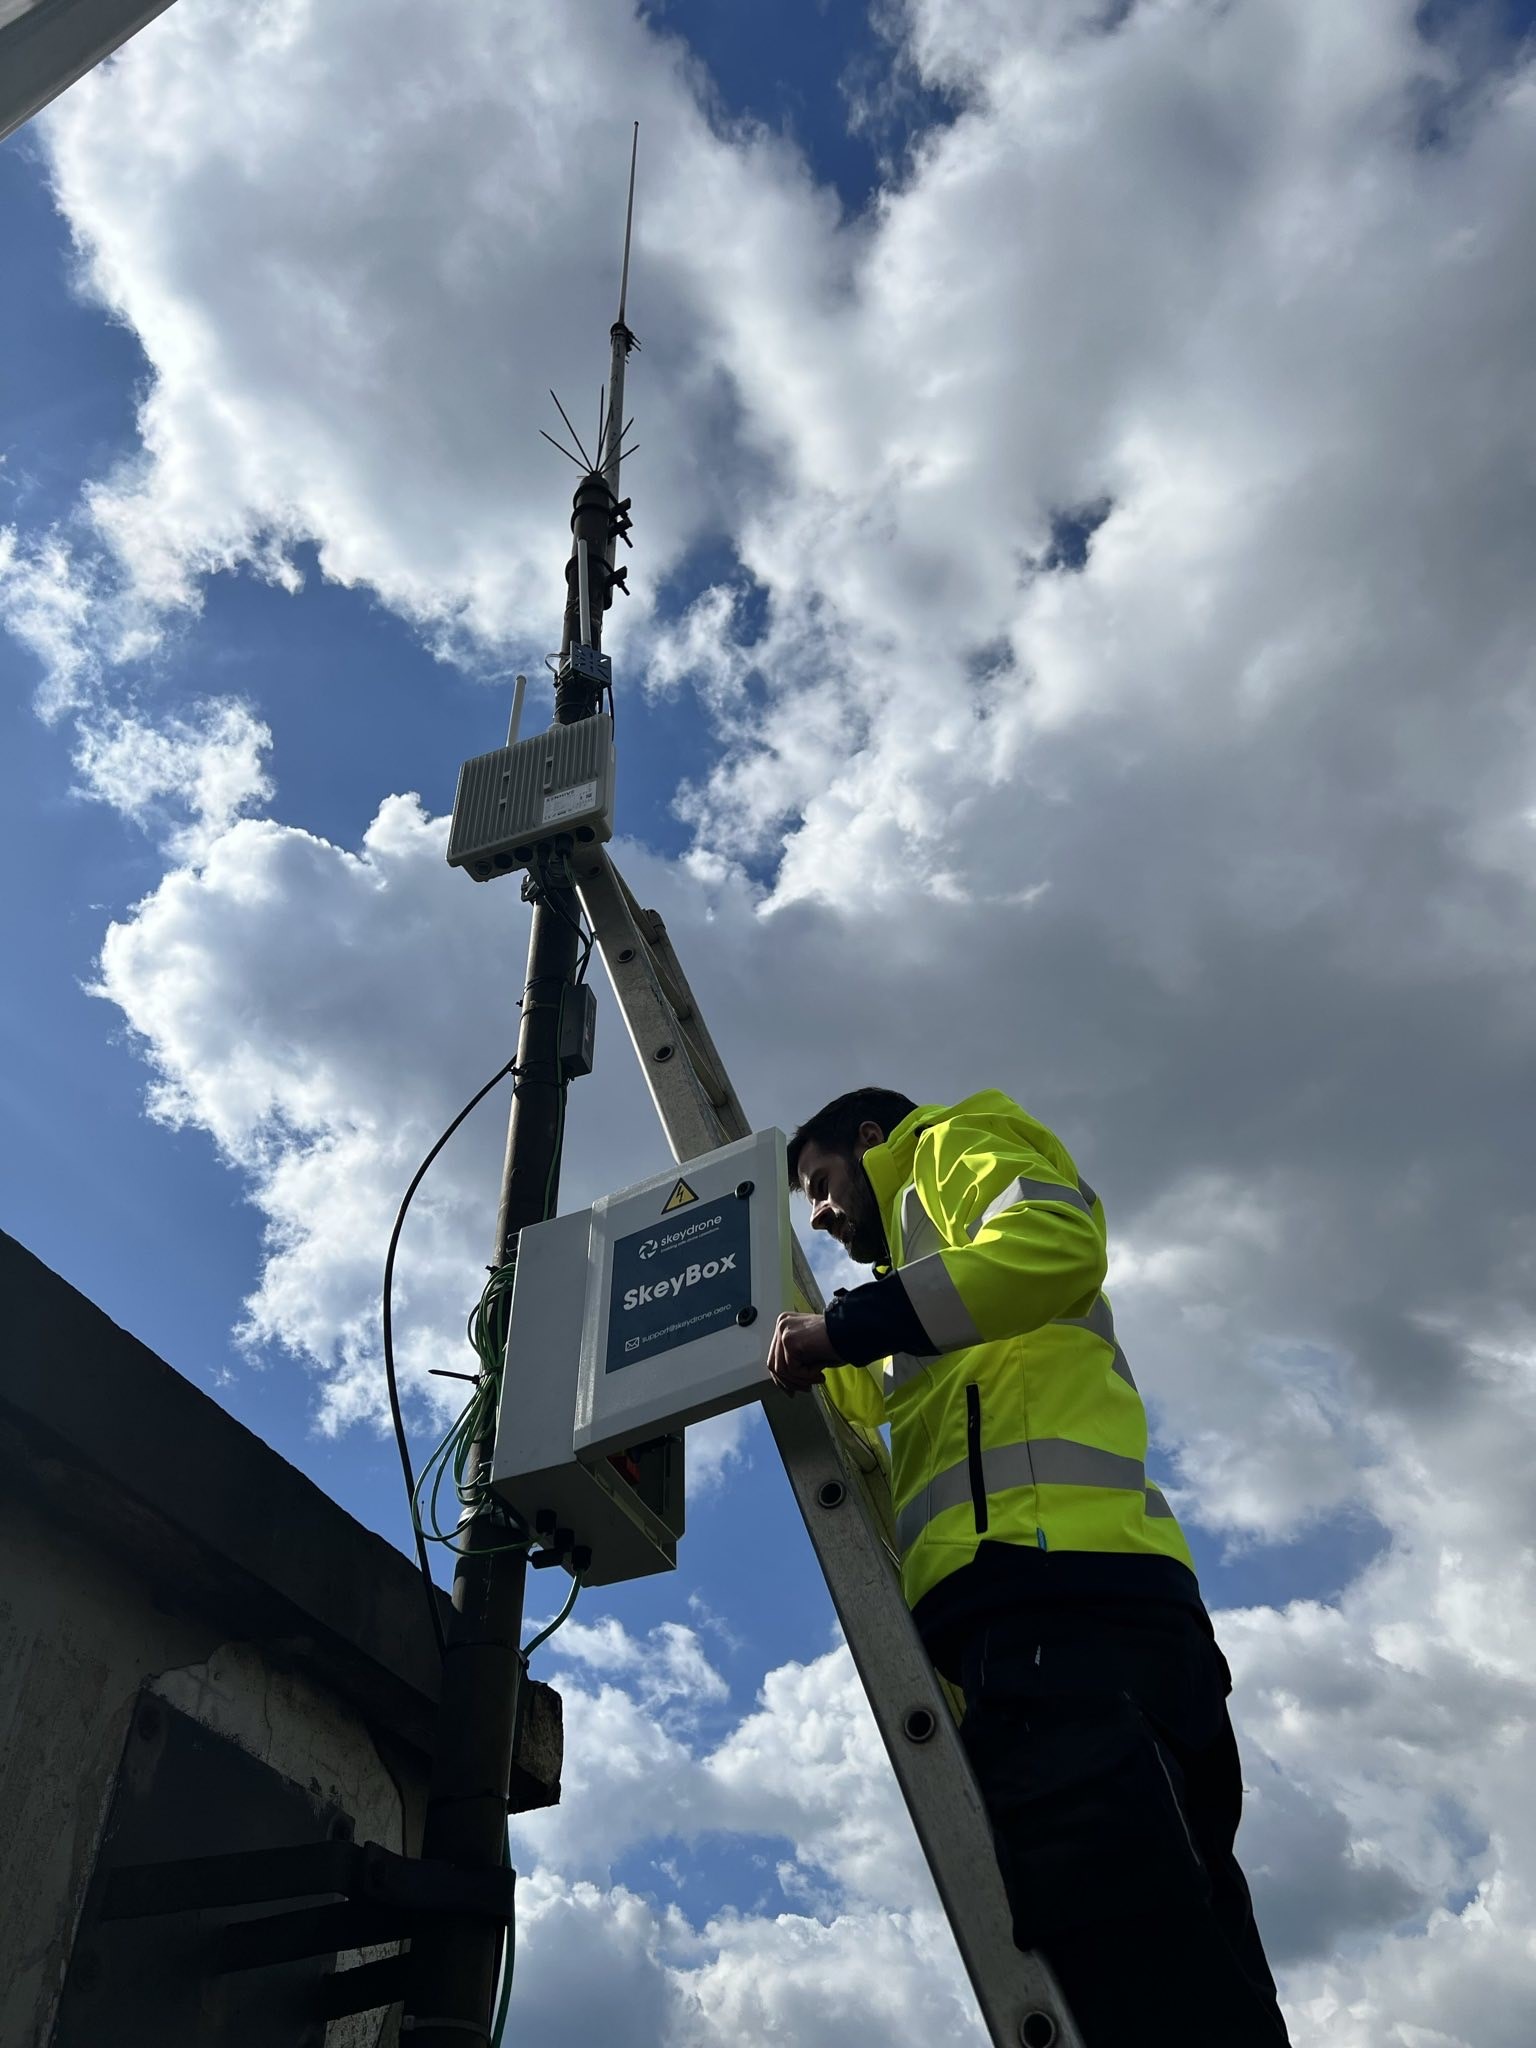 Installation of a SkeyBox for drone detection on a high mast